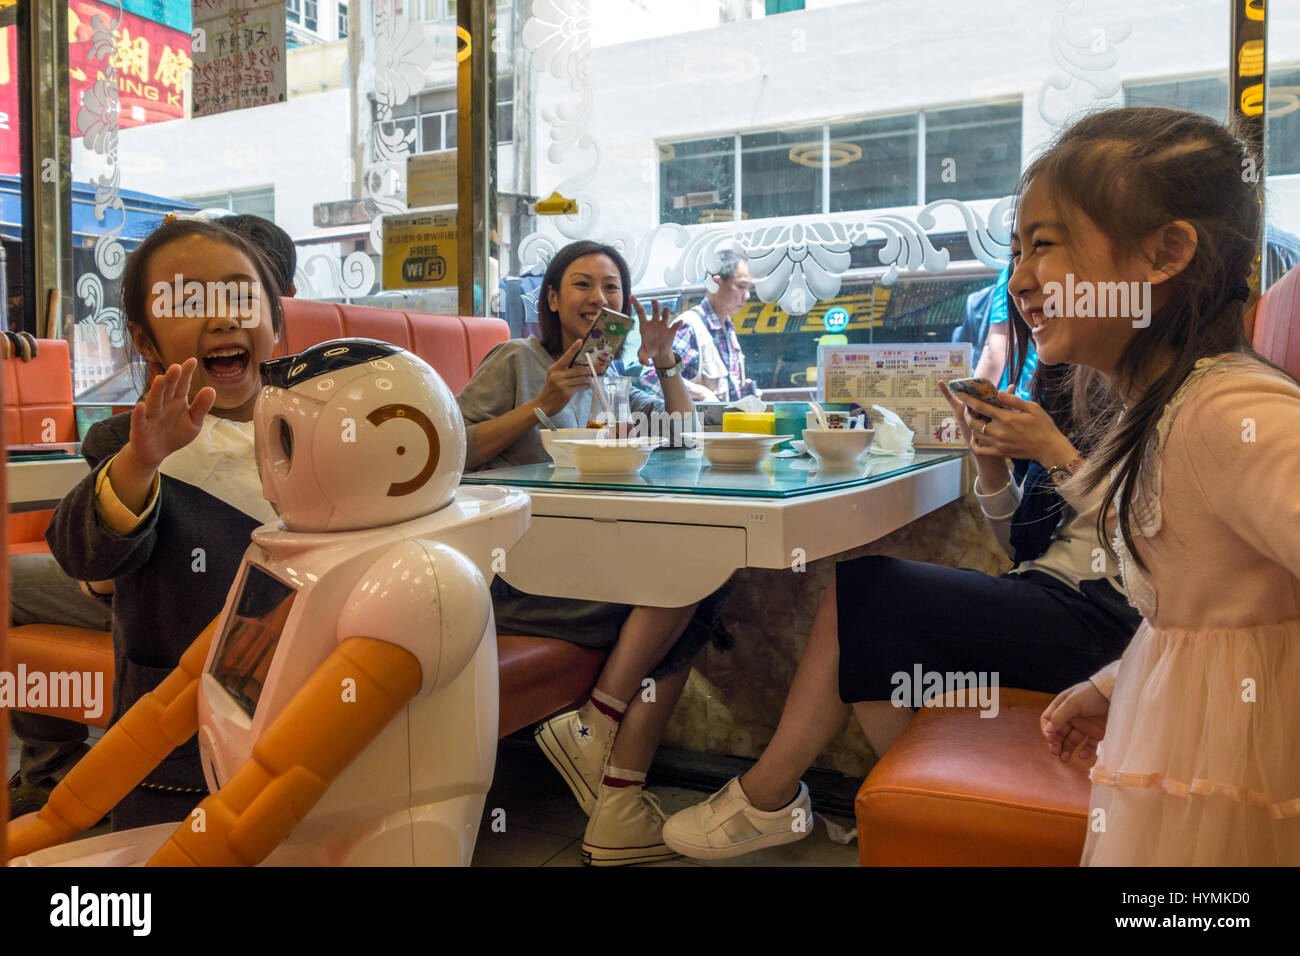 Girls interacting with robot waiter at a restaurant in Hong Kong while mother looks on Stock Photo